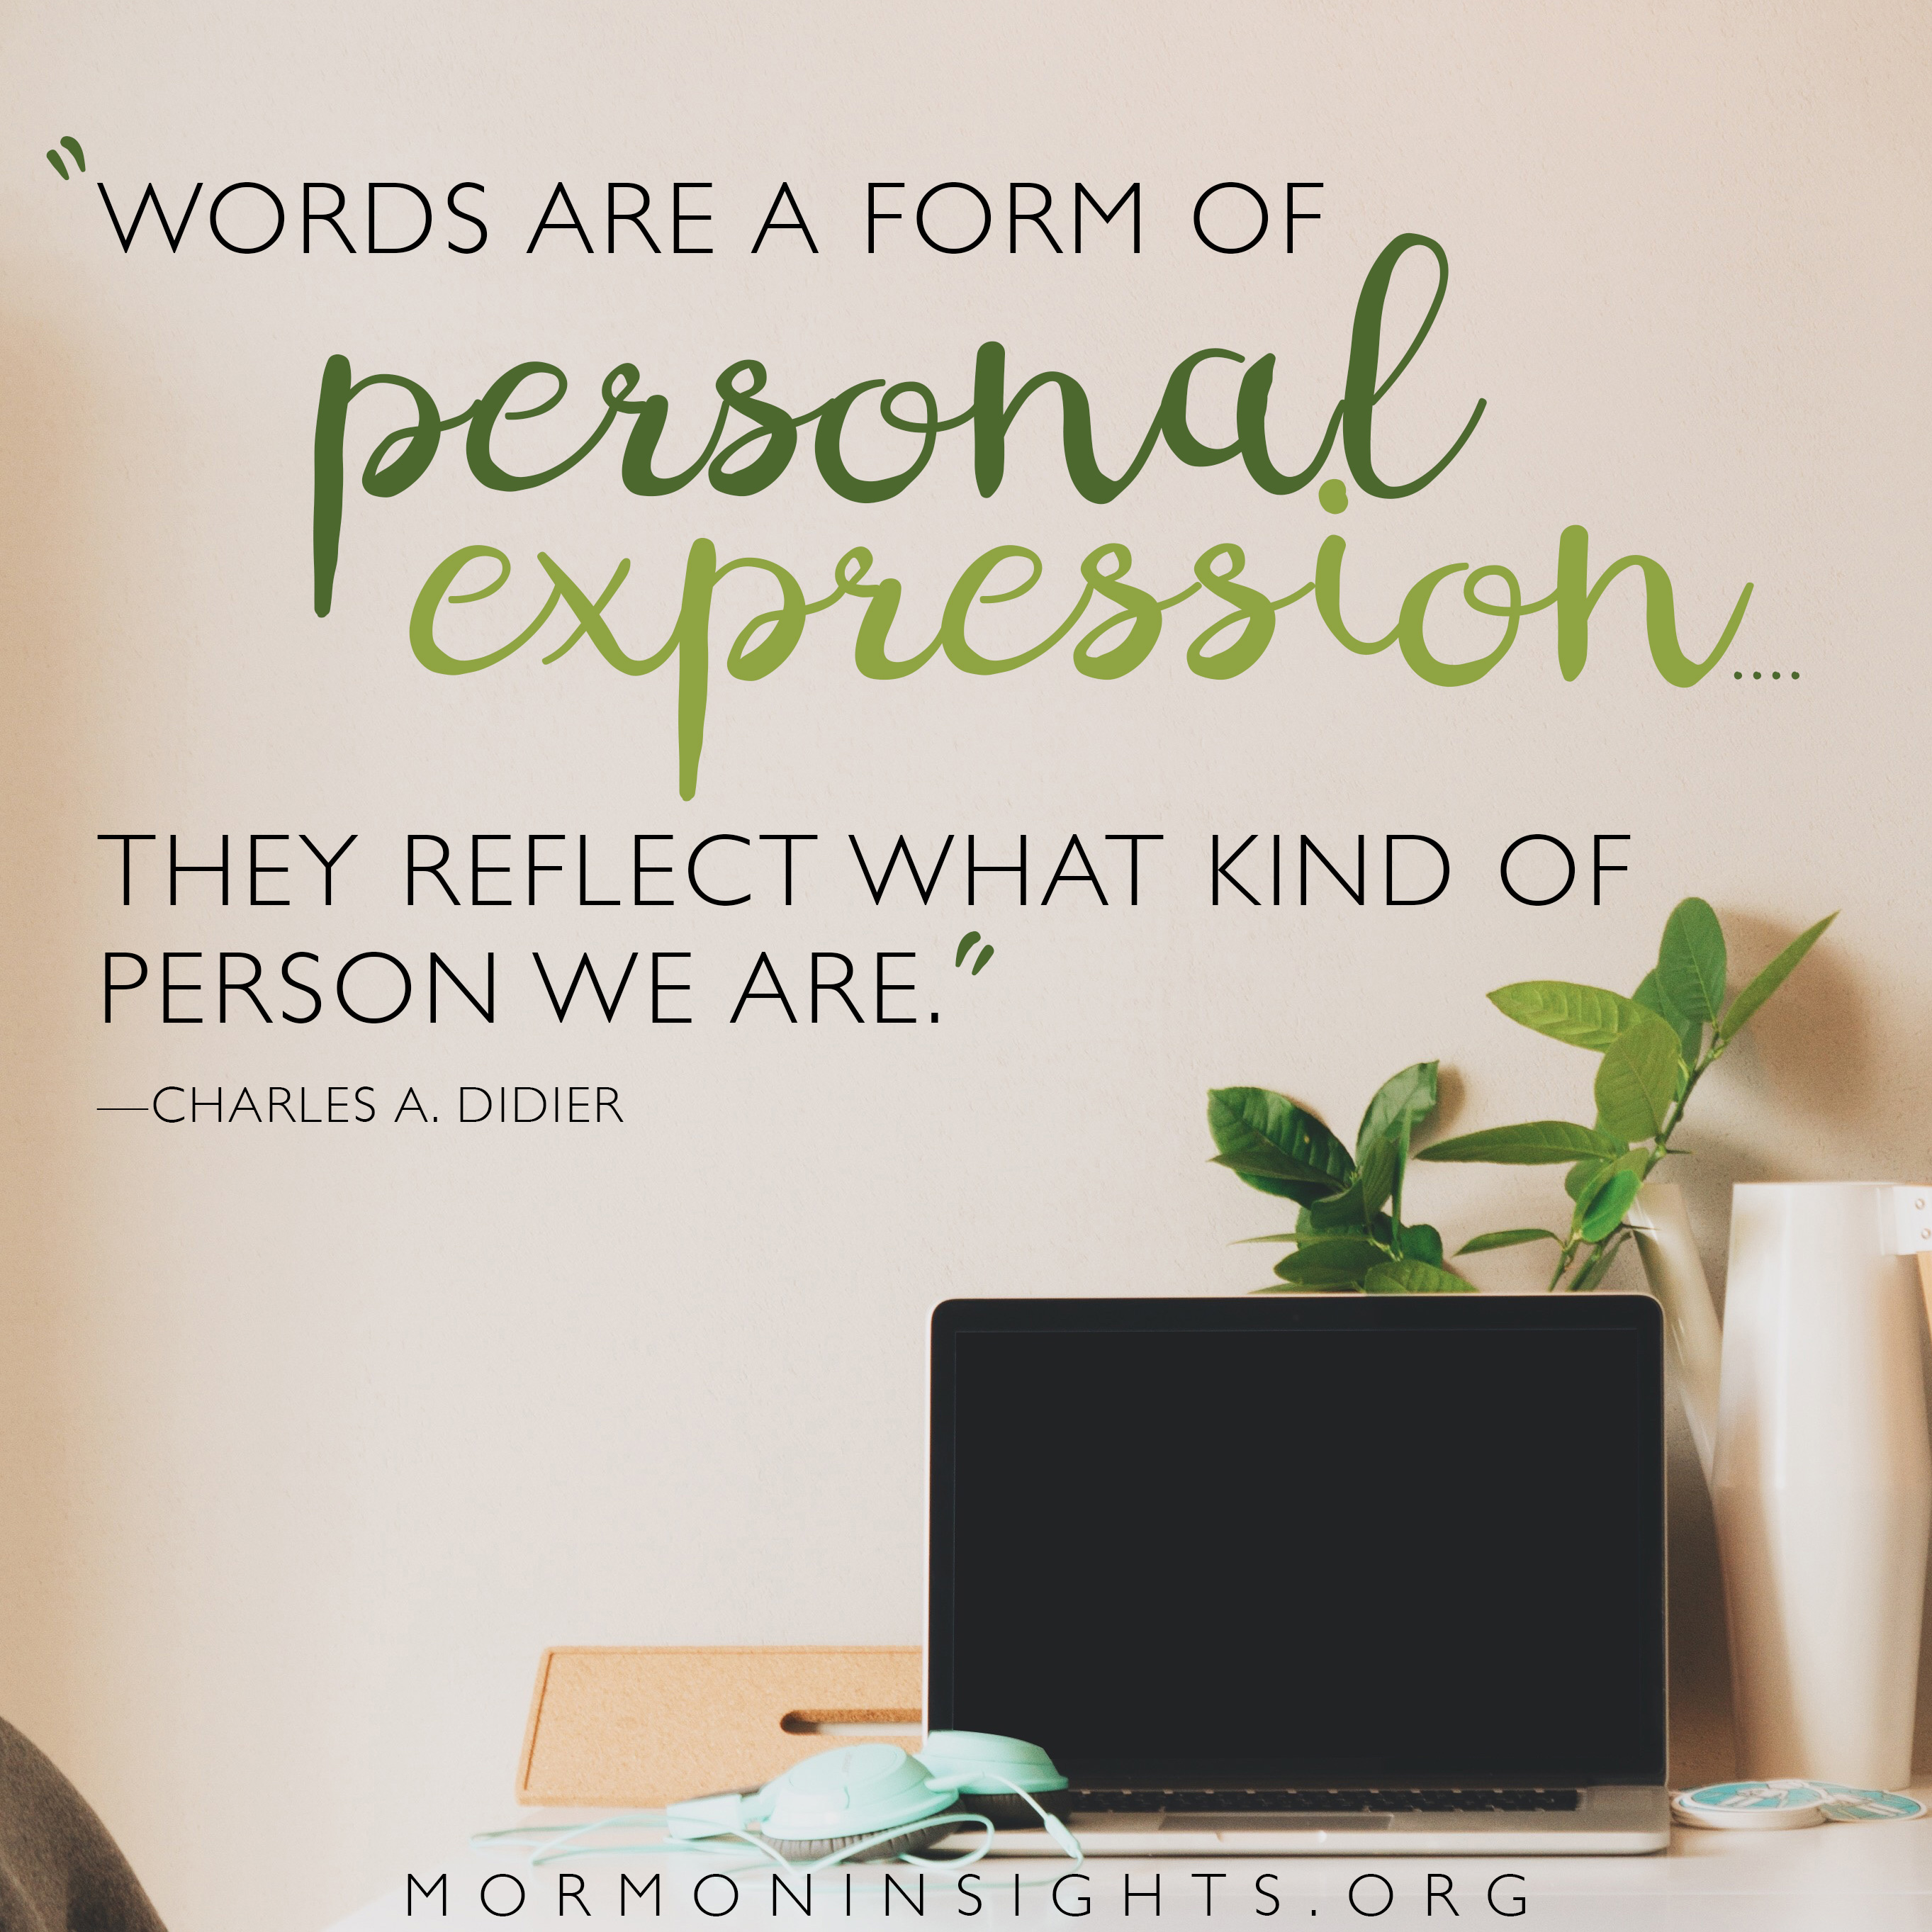 "Words are a form of personal expressiosn. . . . They reflect what kind of person we are." -Charles A. Didier